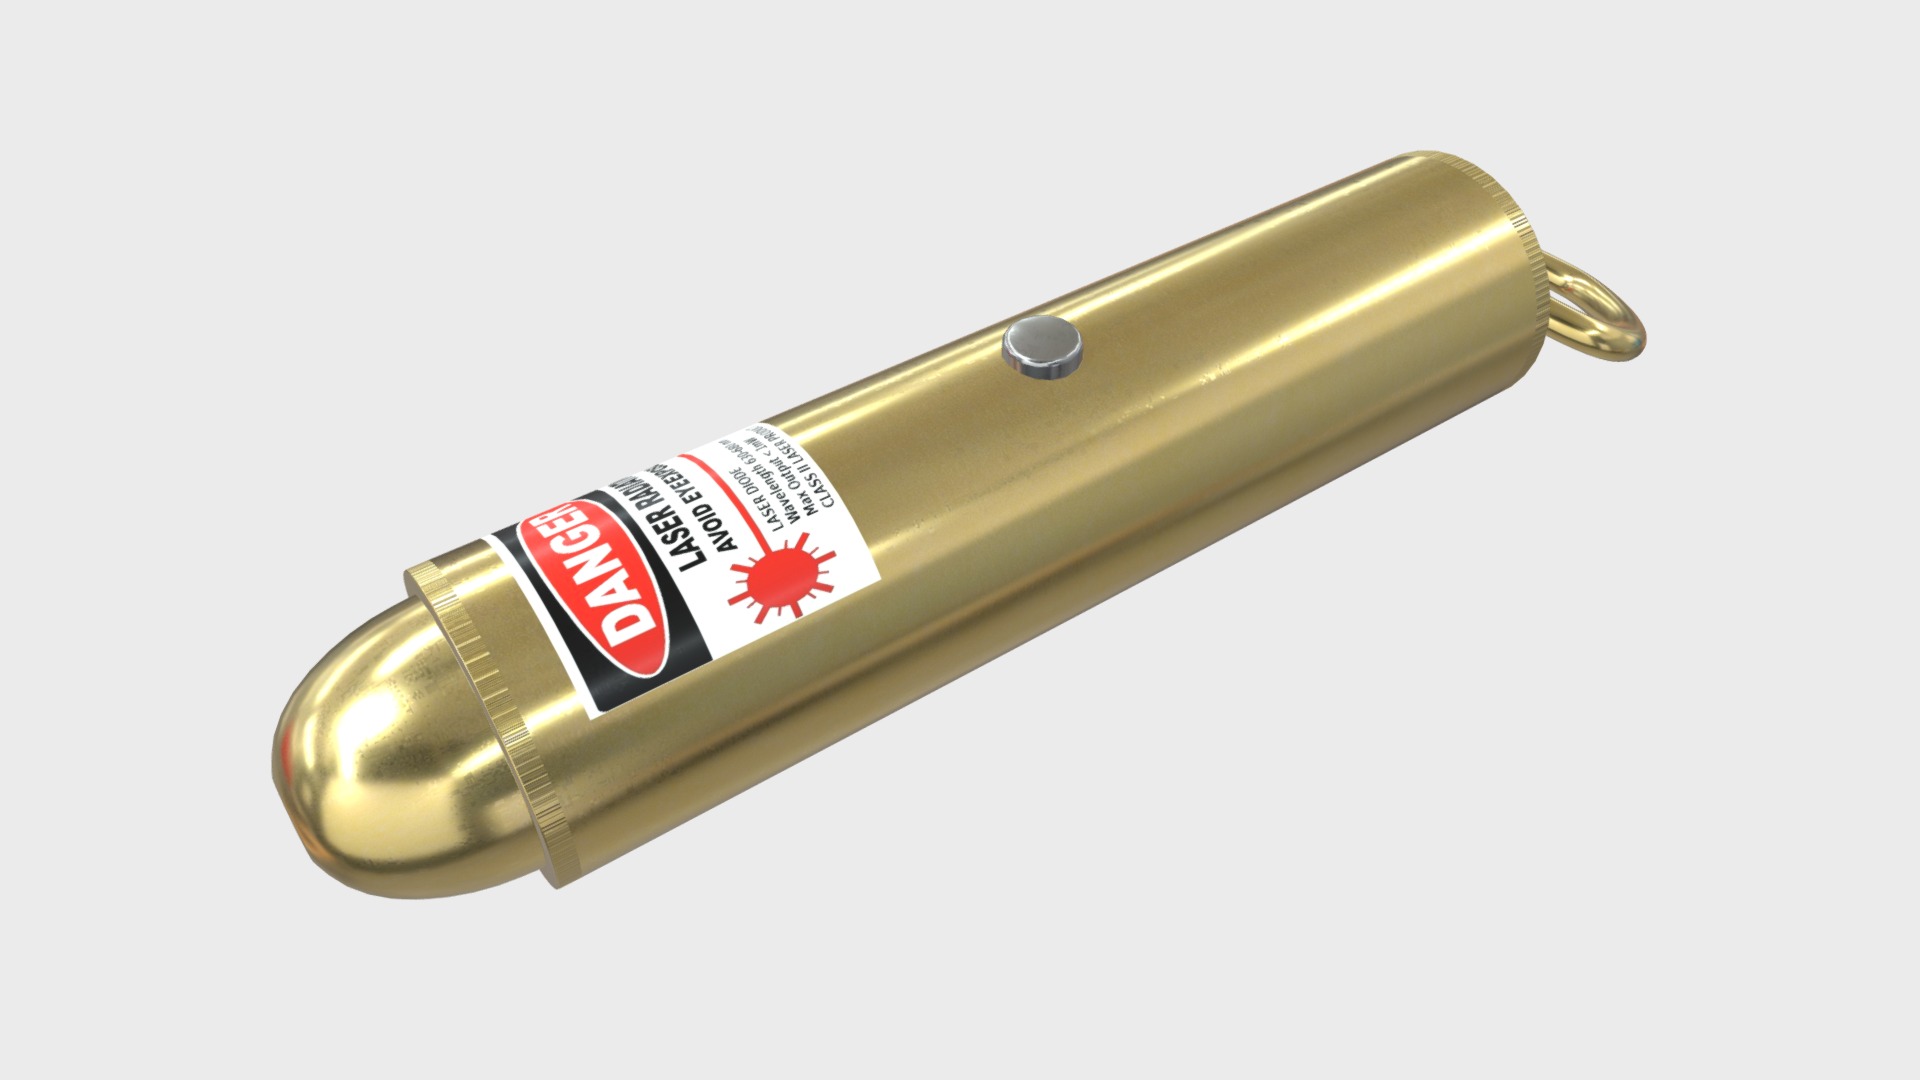 3D model Laser pointer - This is a 3D model of the Laser pointer. The 3D model is about a gold and red pen.